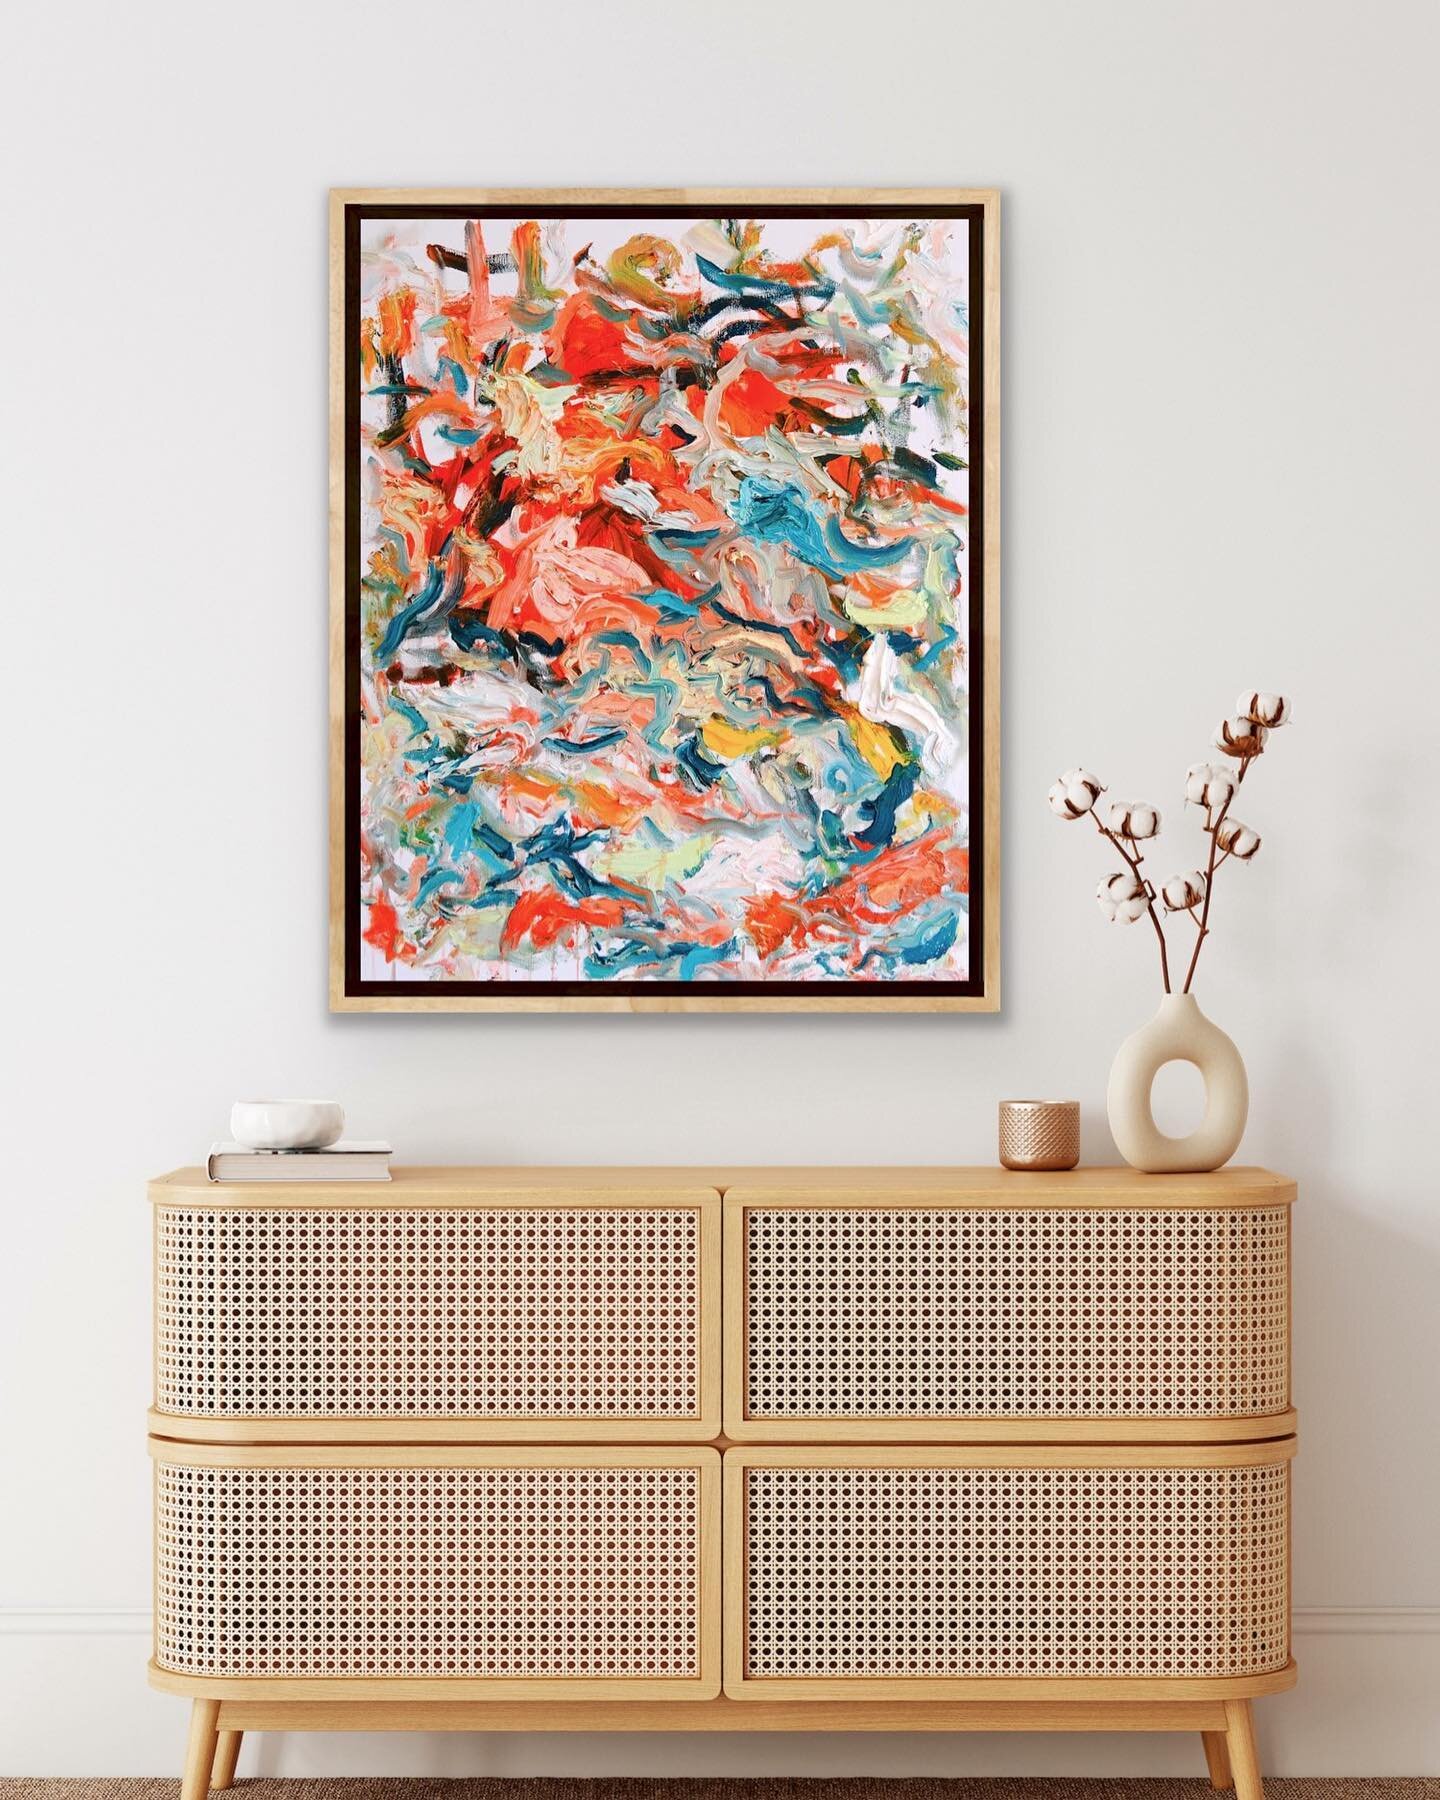 ⁣Happy Saturday sweet friends 💕 Swipe through to some original artworks available to shop right now ☺️ which space + painting combo is your favourite? - love you all xx ⁣
⁣
⁣
⁣
⁣
⁣
⁣
⁣
⁣
⁣
⁣
⁣
⁣
⁣
⁣
⁣
⁣
⁣
⁣
⁣
⁣
⁣
⁣
⁣
⁣
⁣
⁣
⁣
⁣#Modernart #modernartis